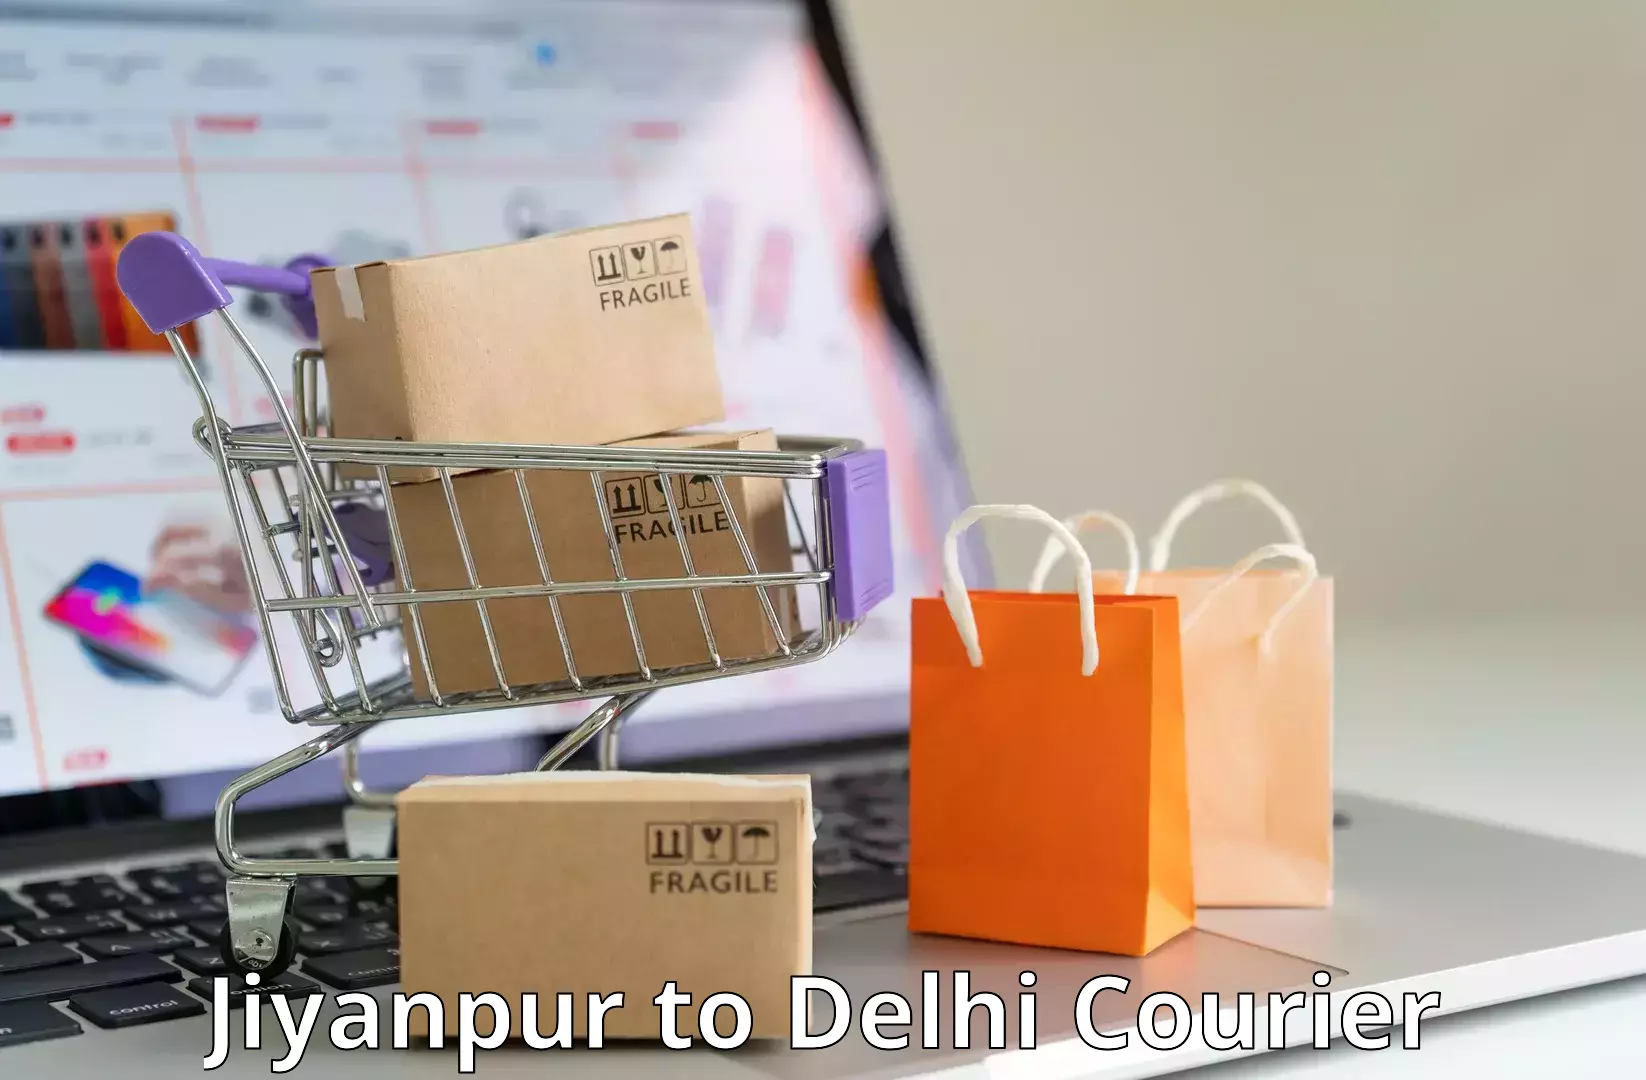 Holiday shipping services Jiyanpur to NCR